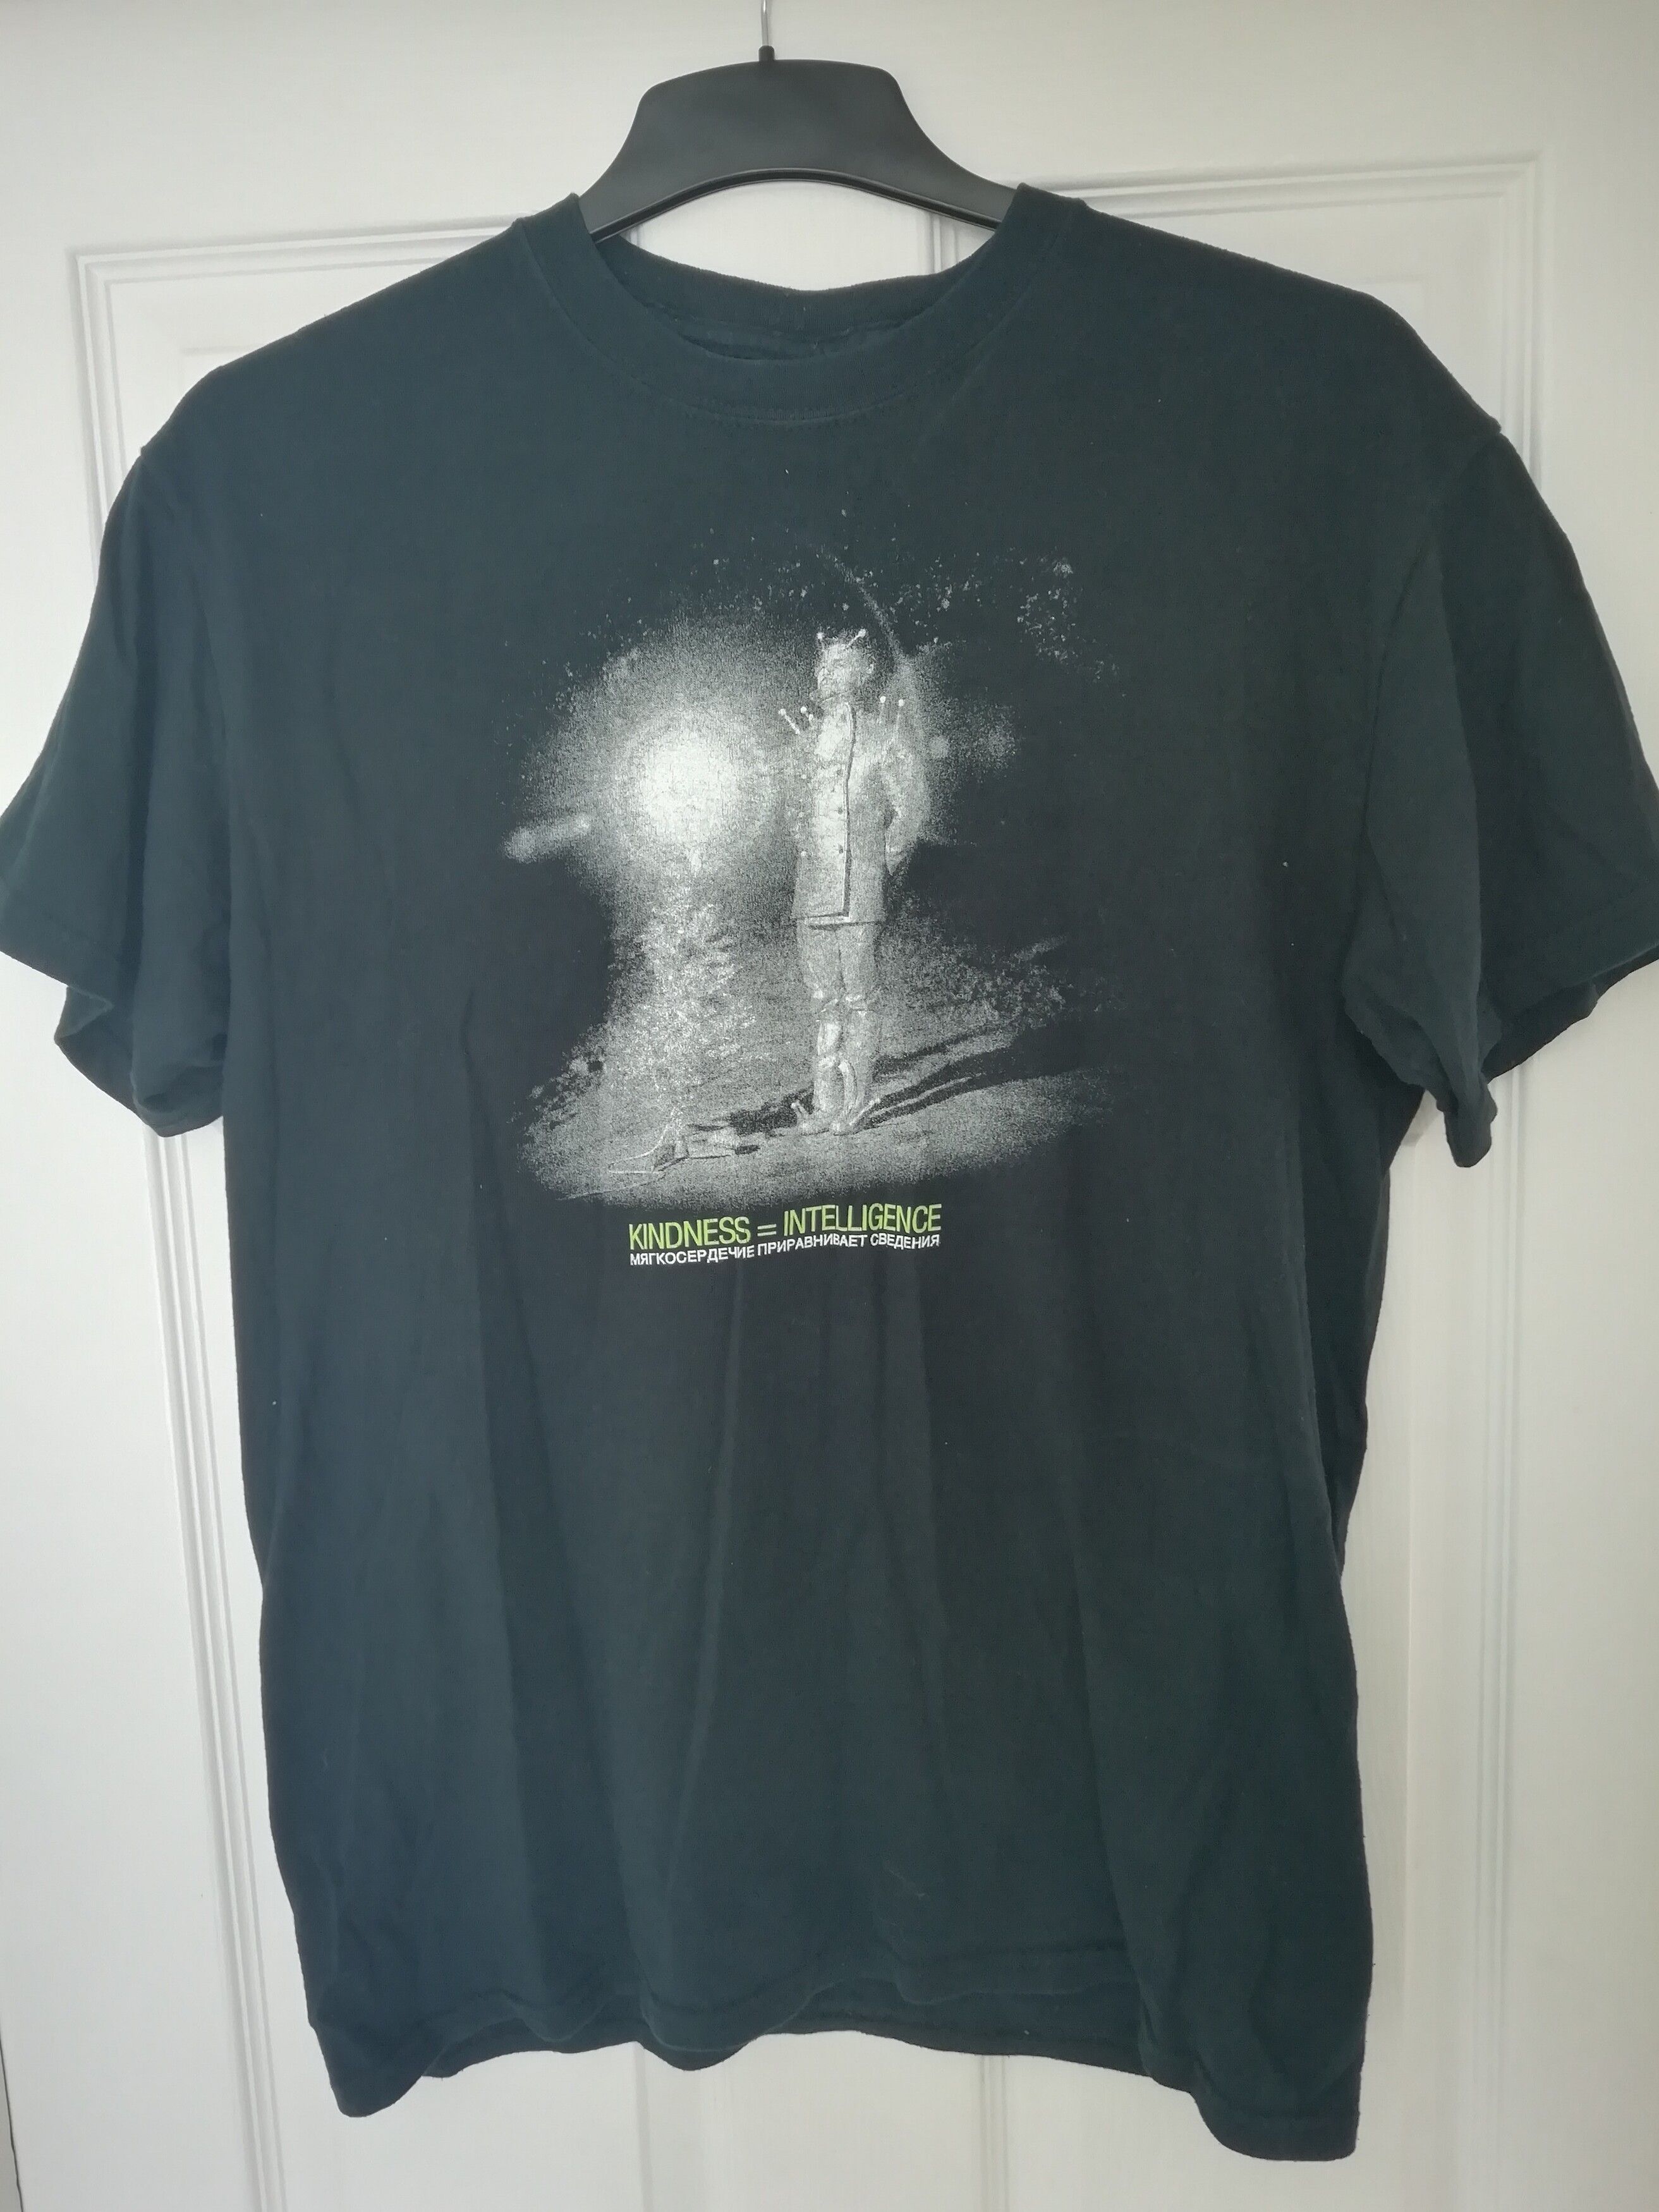 Fruit Of The Loom Flaming Lips T Shirt Size US M / EU 48-50 / 2 - 1 Preview